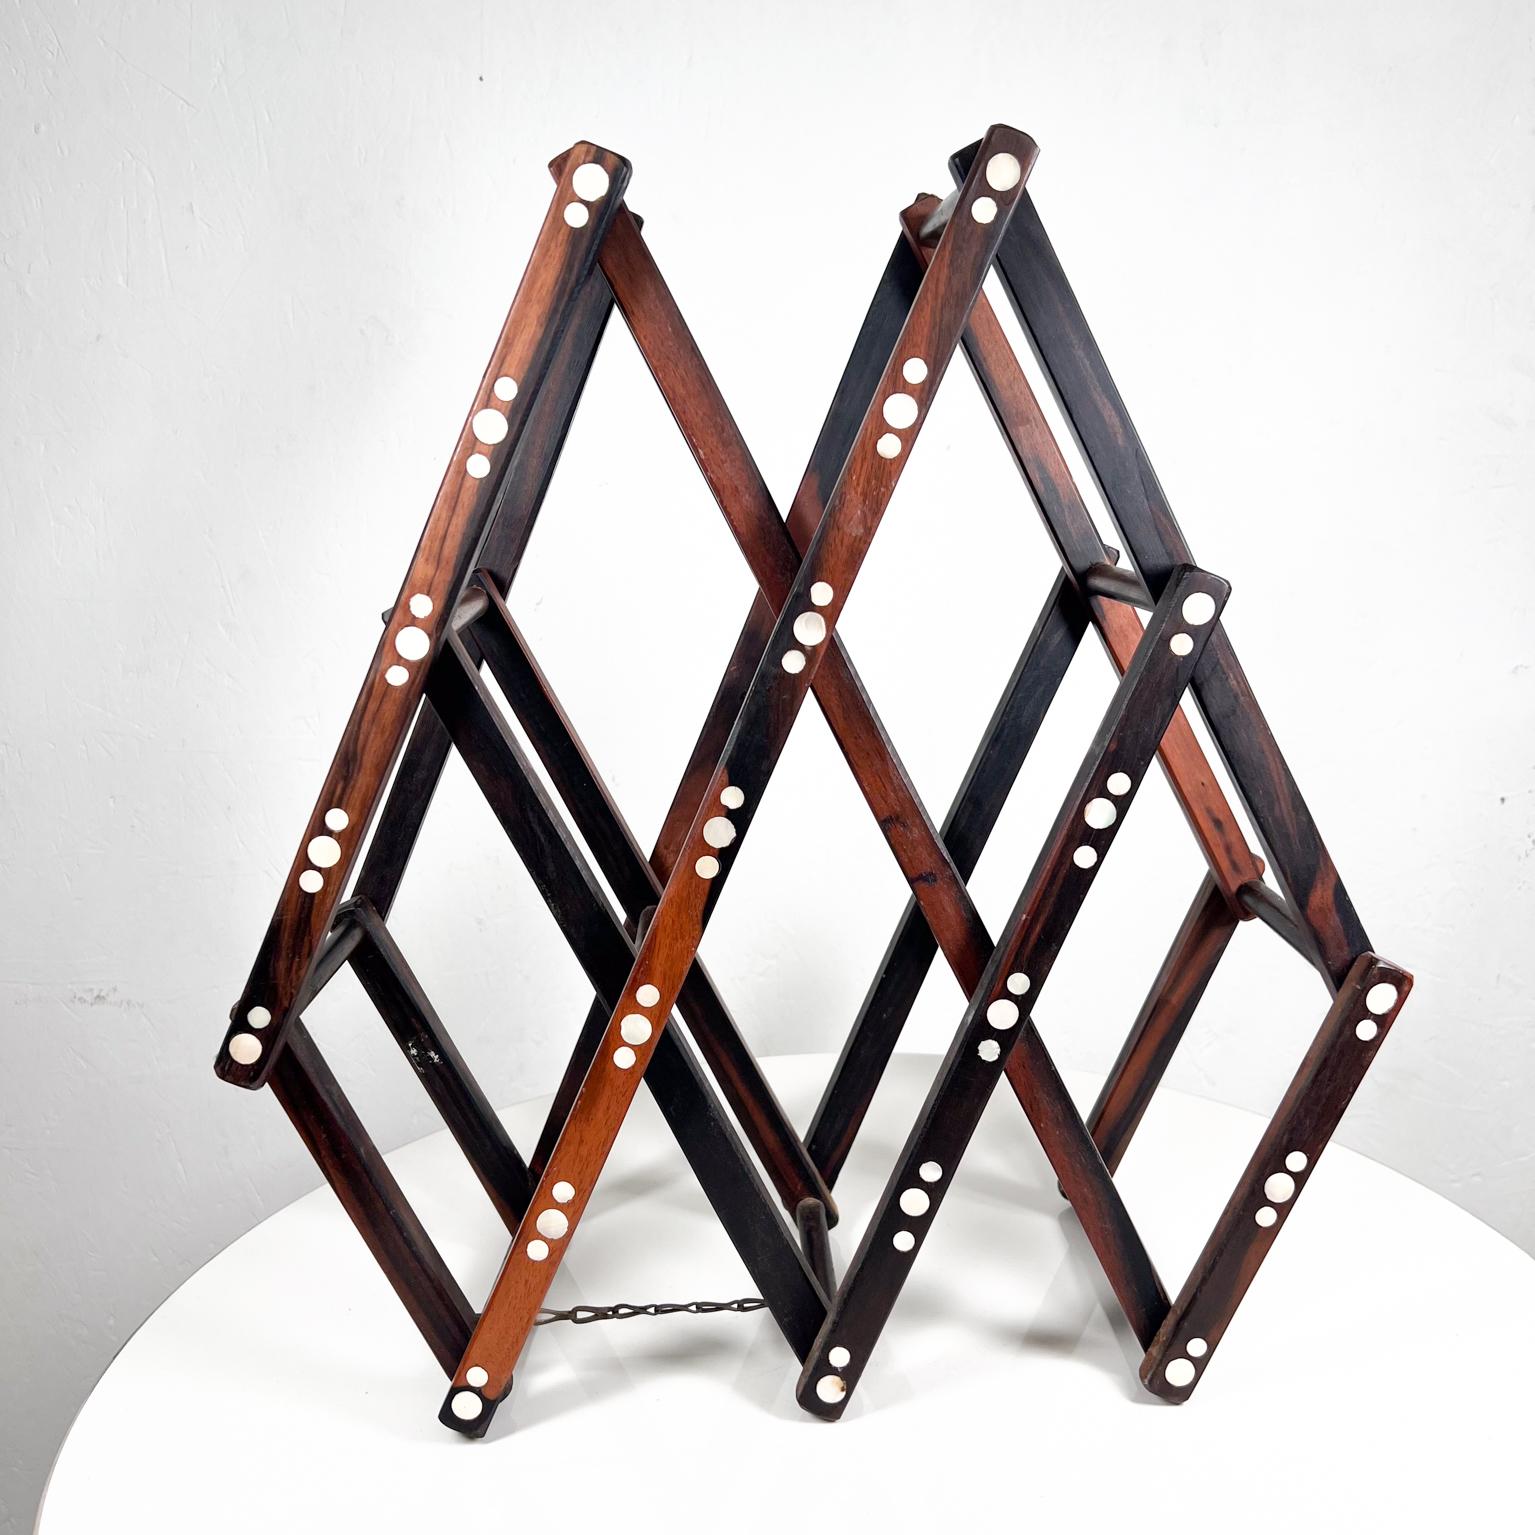 Vintage Wine Rack Collapsible in Rosewood and Abalone
16.5 w x 6.5 d x 17.5 tall
19.13 x 6.5 x 3.5 closed
Wine holder Rack Rosewood with abalone inserts and Rusty chain.
Preowned vintage condition unrestored.
Refer to images.



.